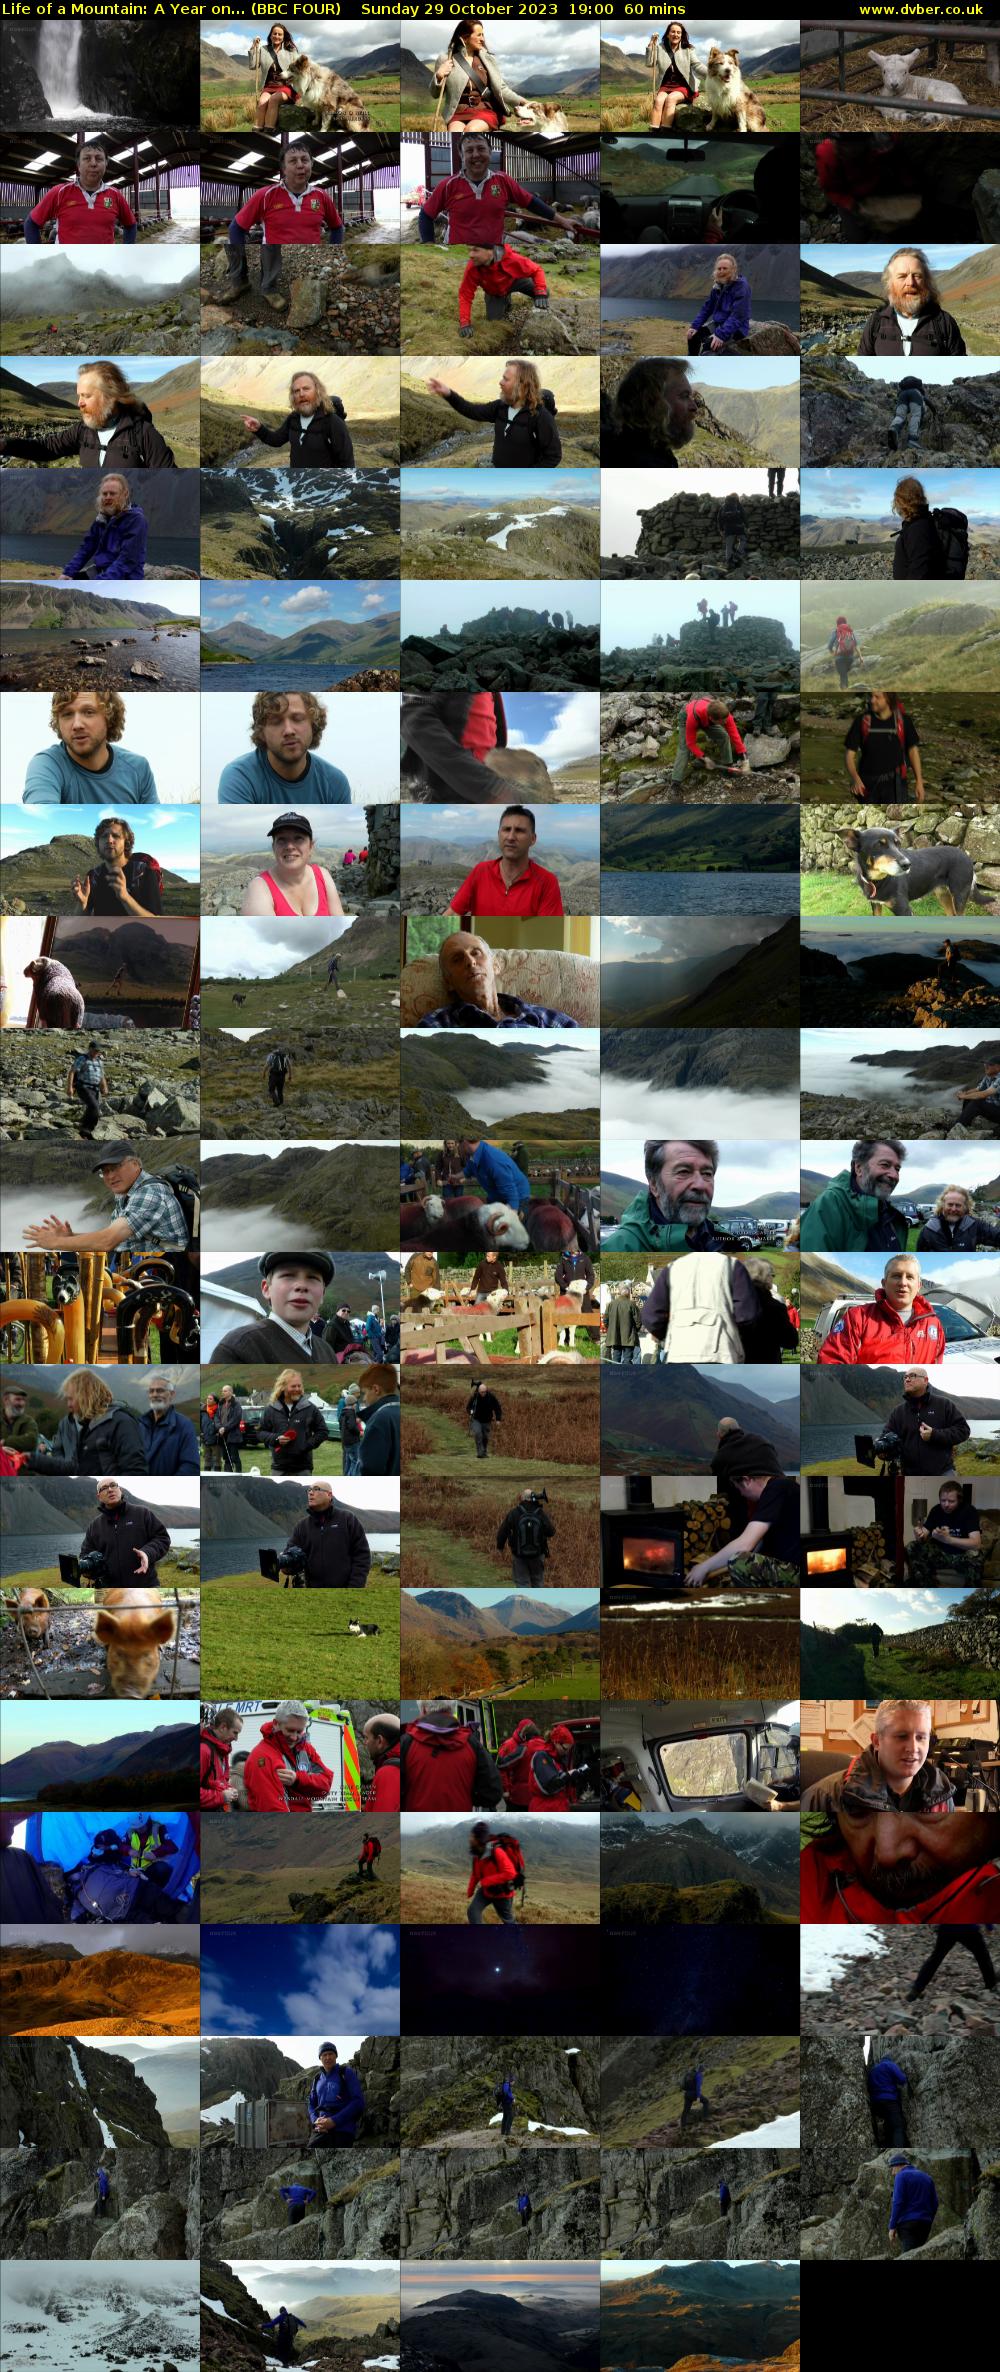 Life of a Mountain: A Year on... (BBC FOUR) Sunday 29 October 2023 19:00 - 20:00